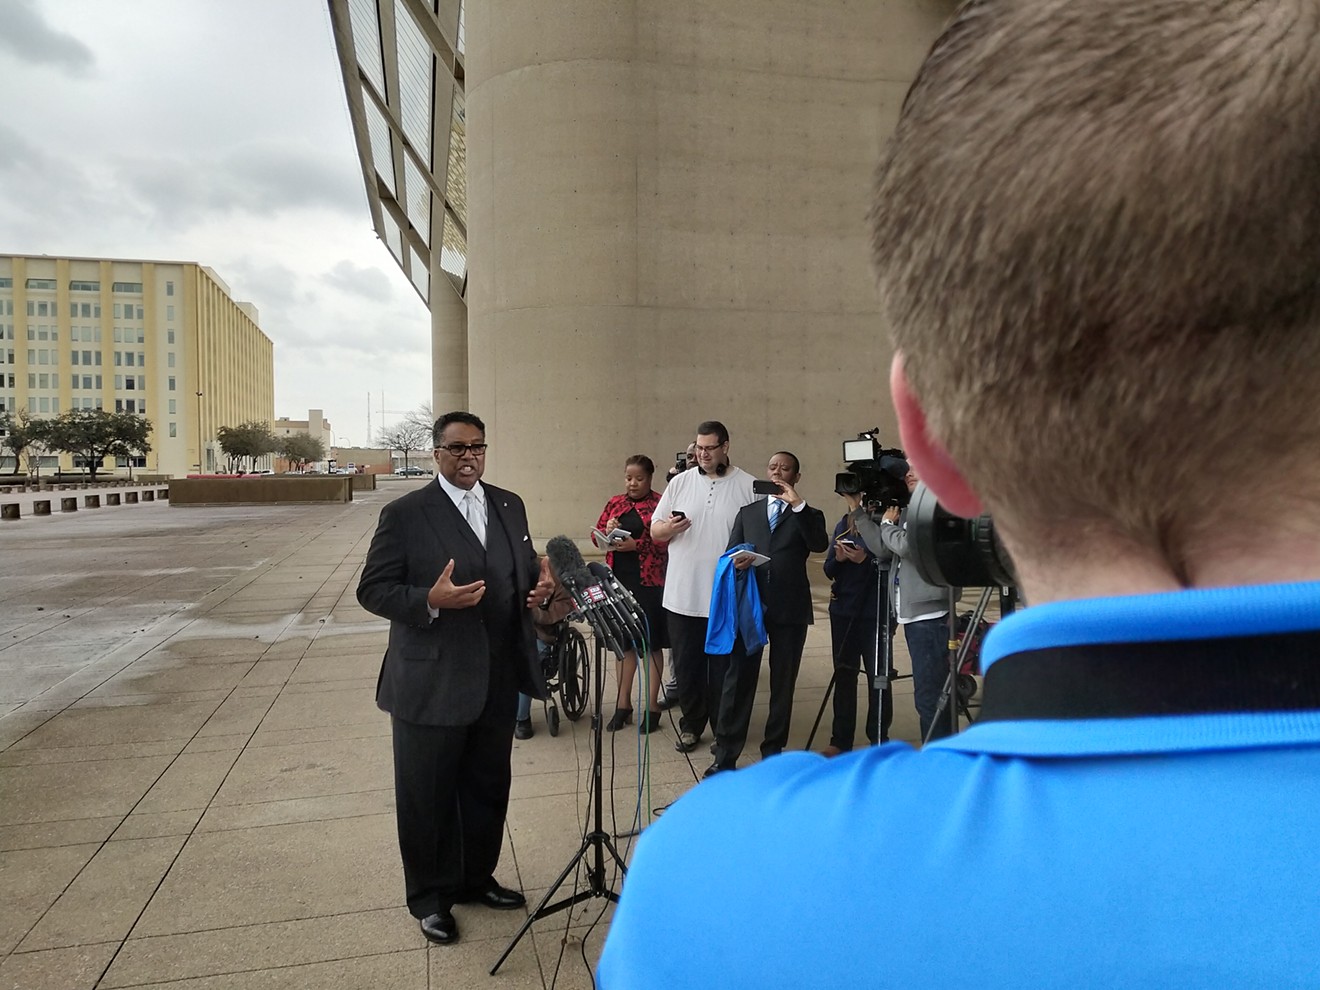 Dwaine Caraway, who owns five guns, speaks out against the NRA at Dallas City Hall on Monday Feb. 19.